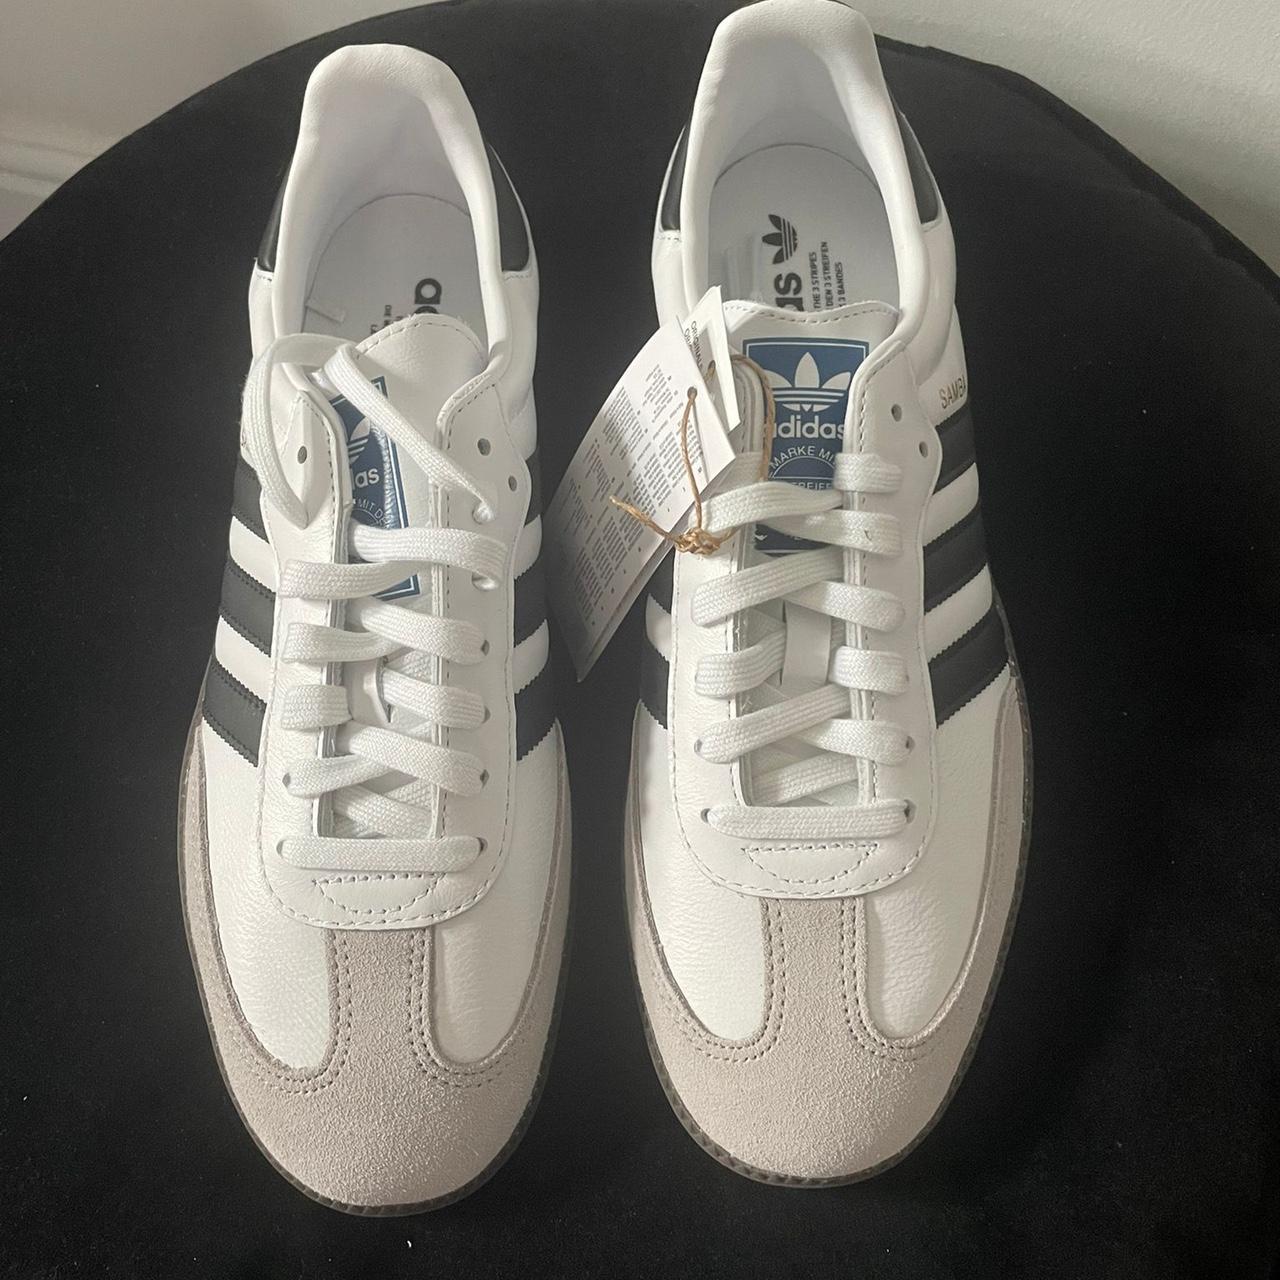 Adidas Samba OG trainers in size 8 Brand new in... - Depop